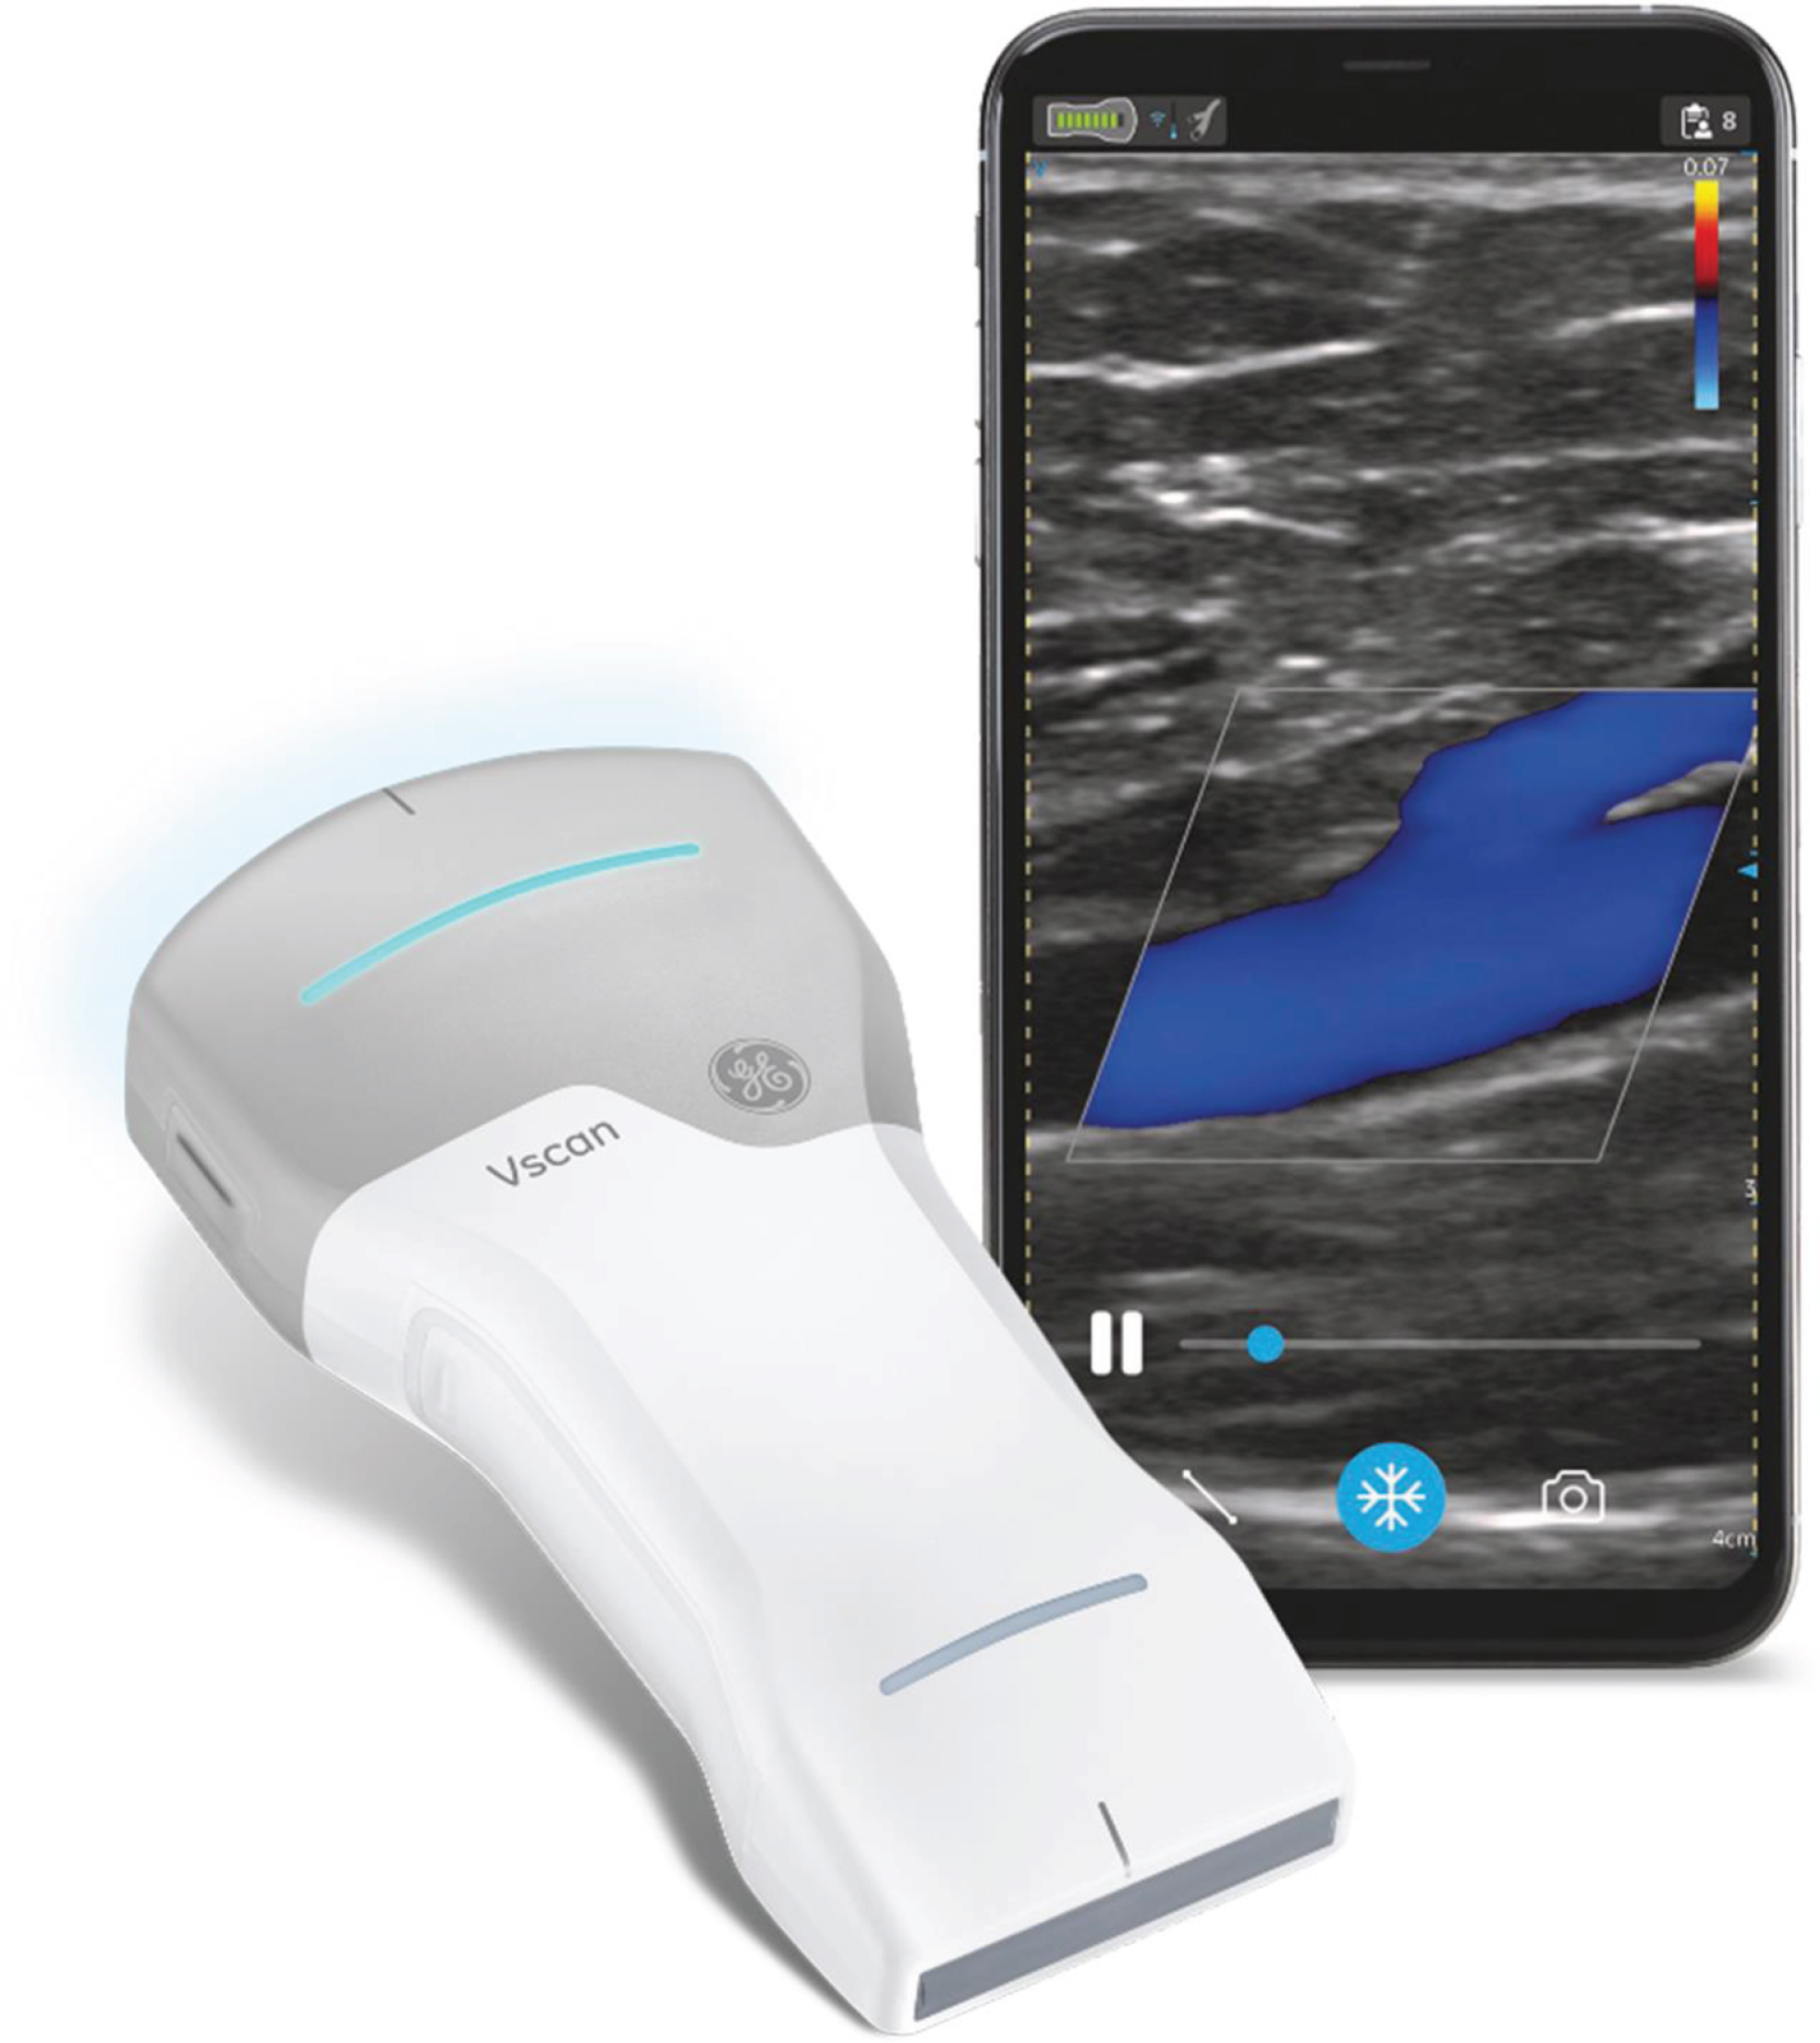 Wireless Point Of Care Ultrasound First Experiences With A New Generation Handheld Device Ios 9520